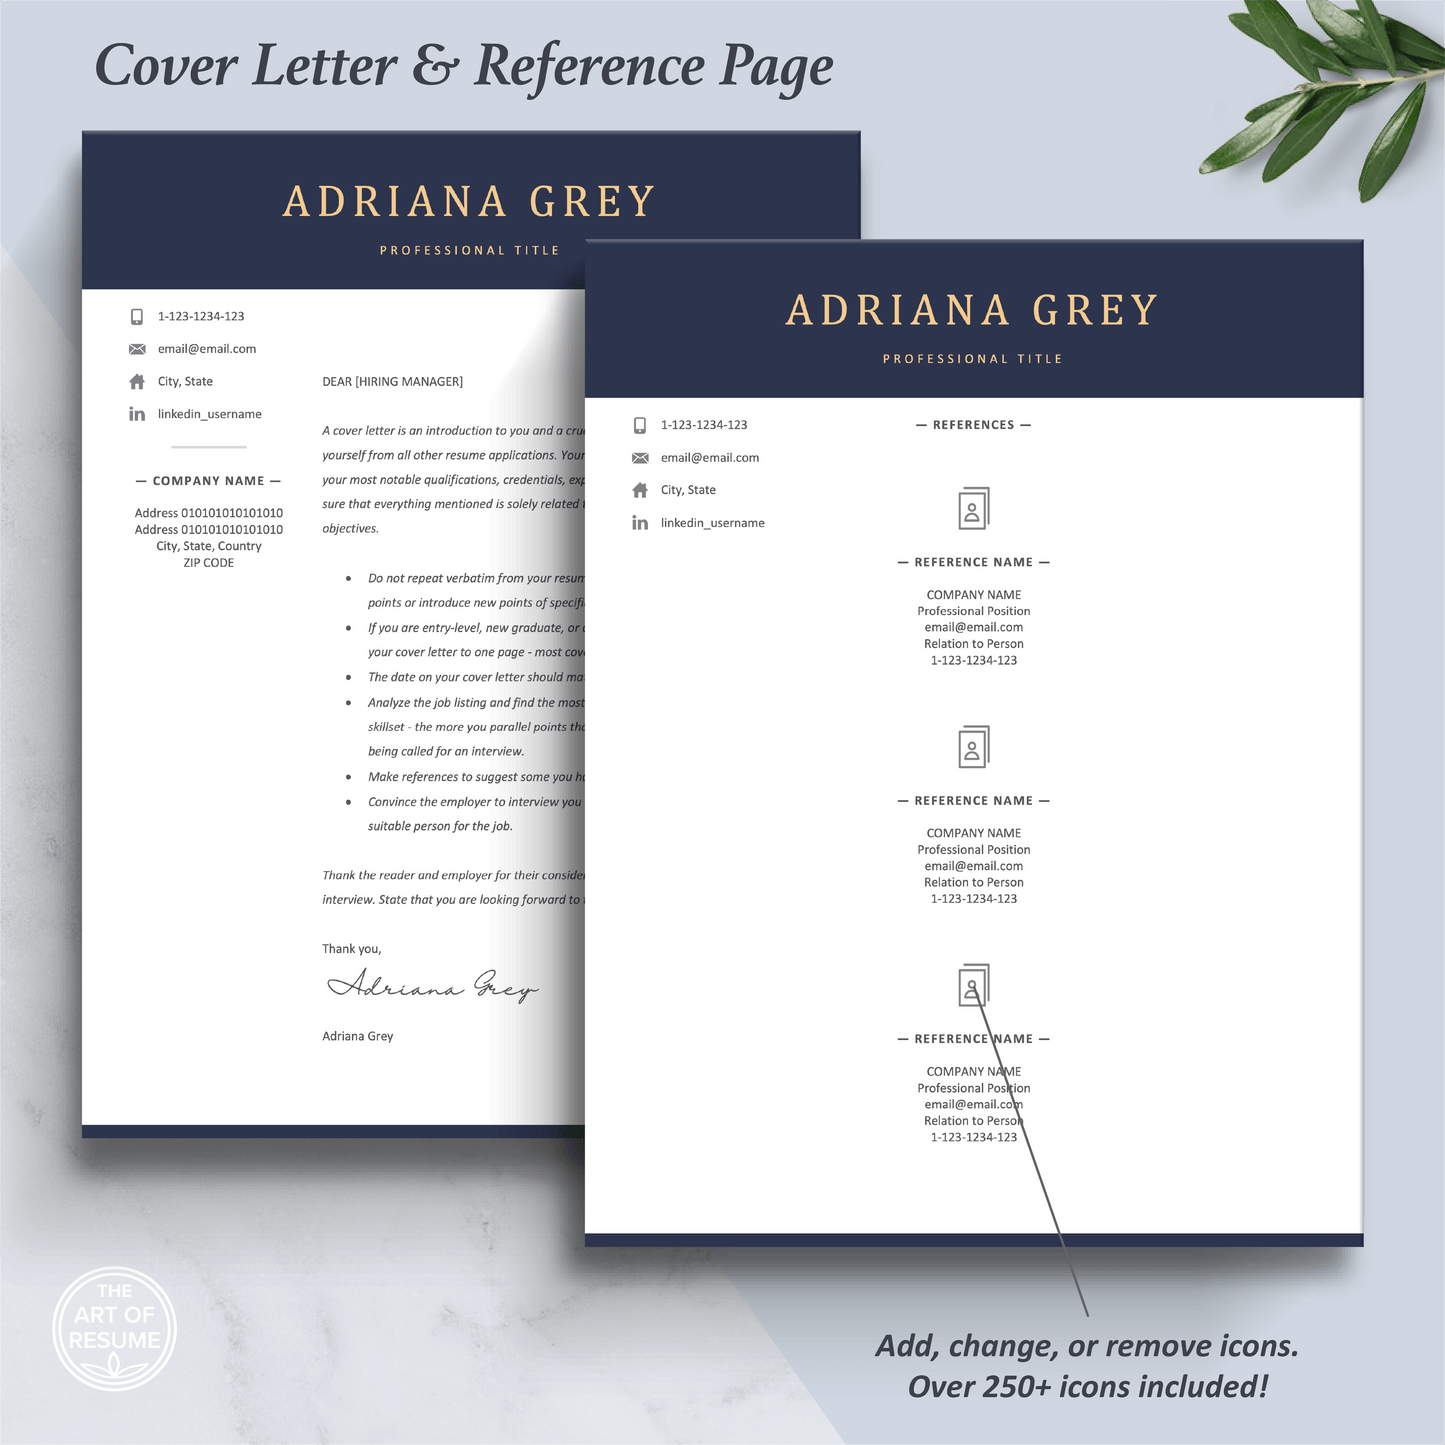 The Art of Resume Templates | Professional Executive CEO C-Suite Level Navy Blue Matching Cover Letter and Reference Page Design Templates Instant Download